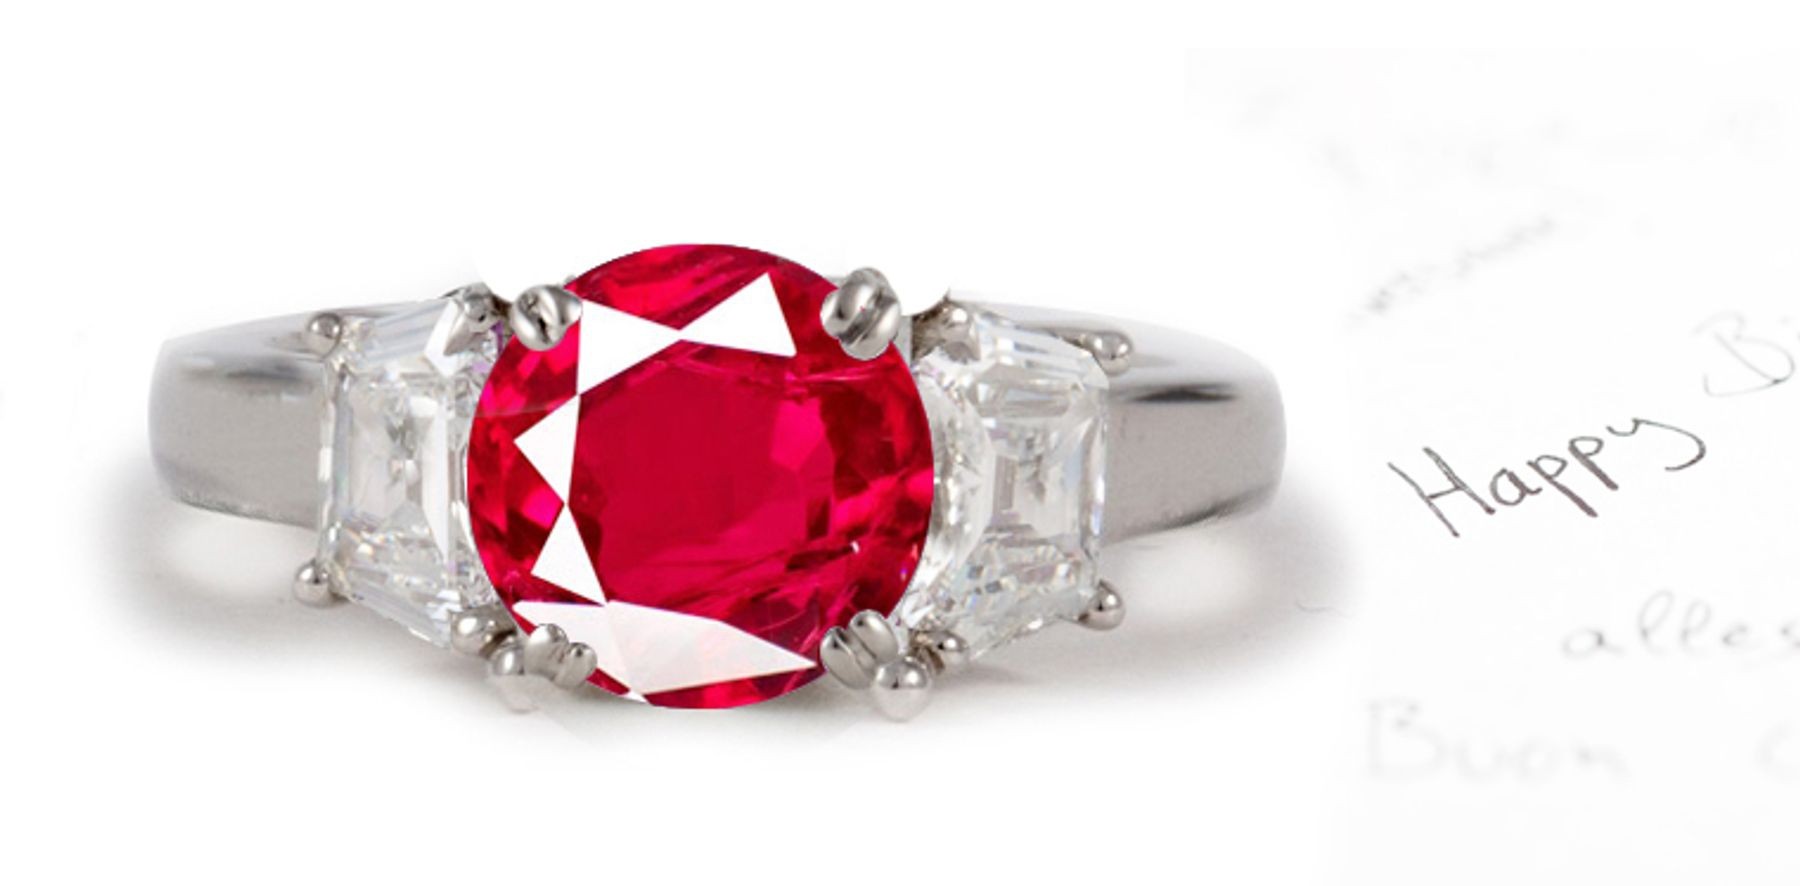 Variety of Styles: View 3 Stone Round Fine Ruby & Shield Cut Side Stones Framed Brilliant Diamond Ring Most Surely Secured in 14k White Gold